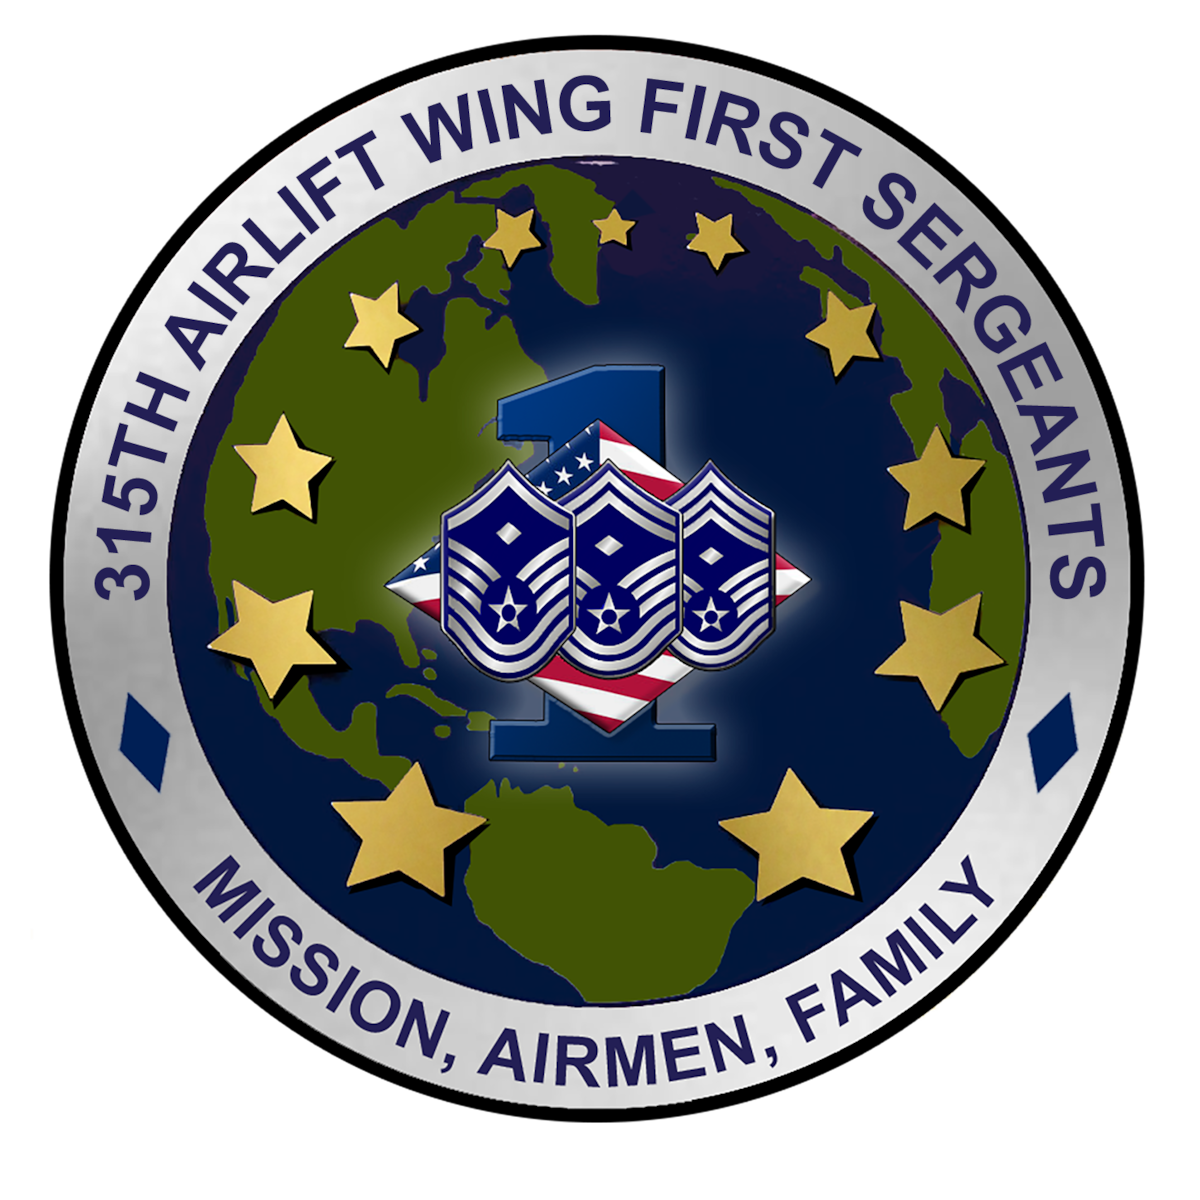 315th Airlift Wing First Sergeants logo.